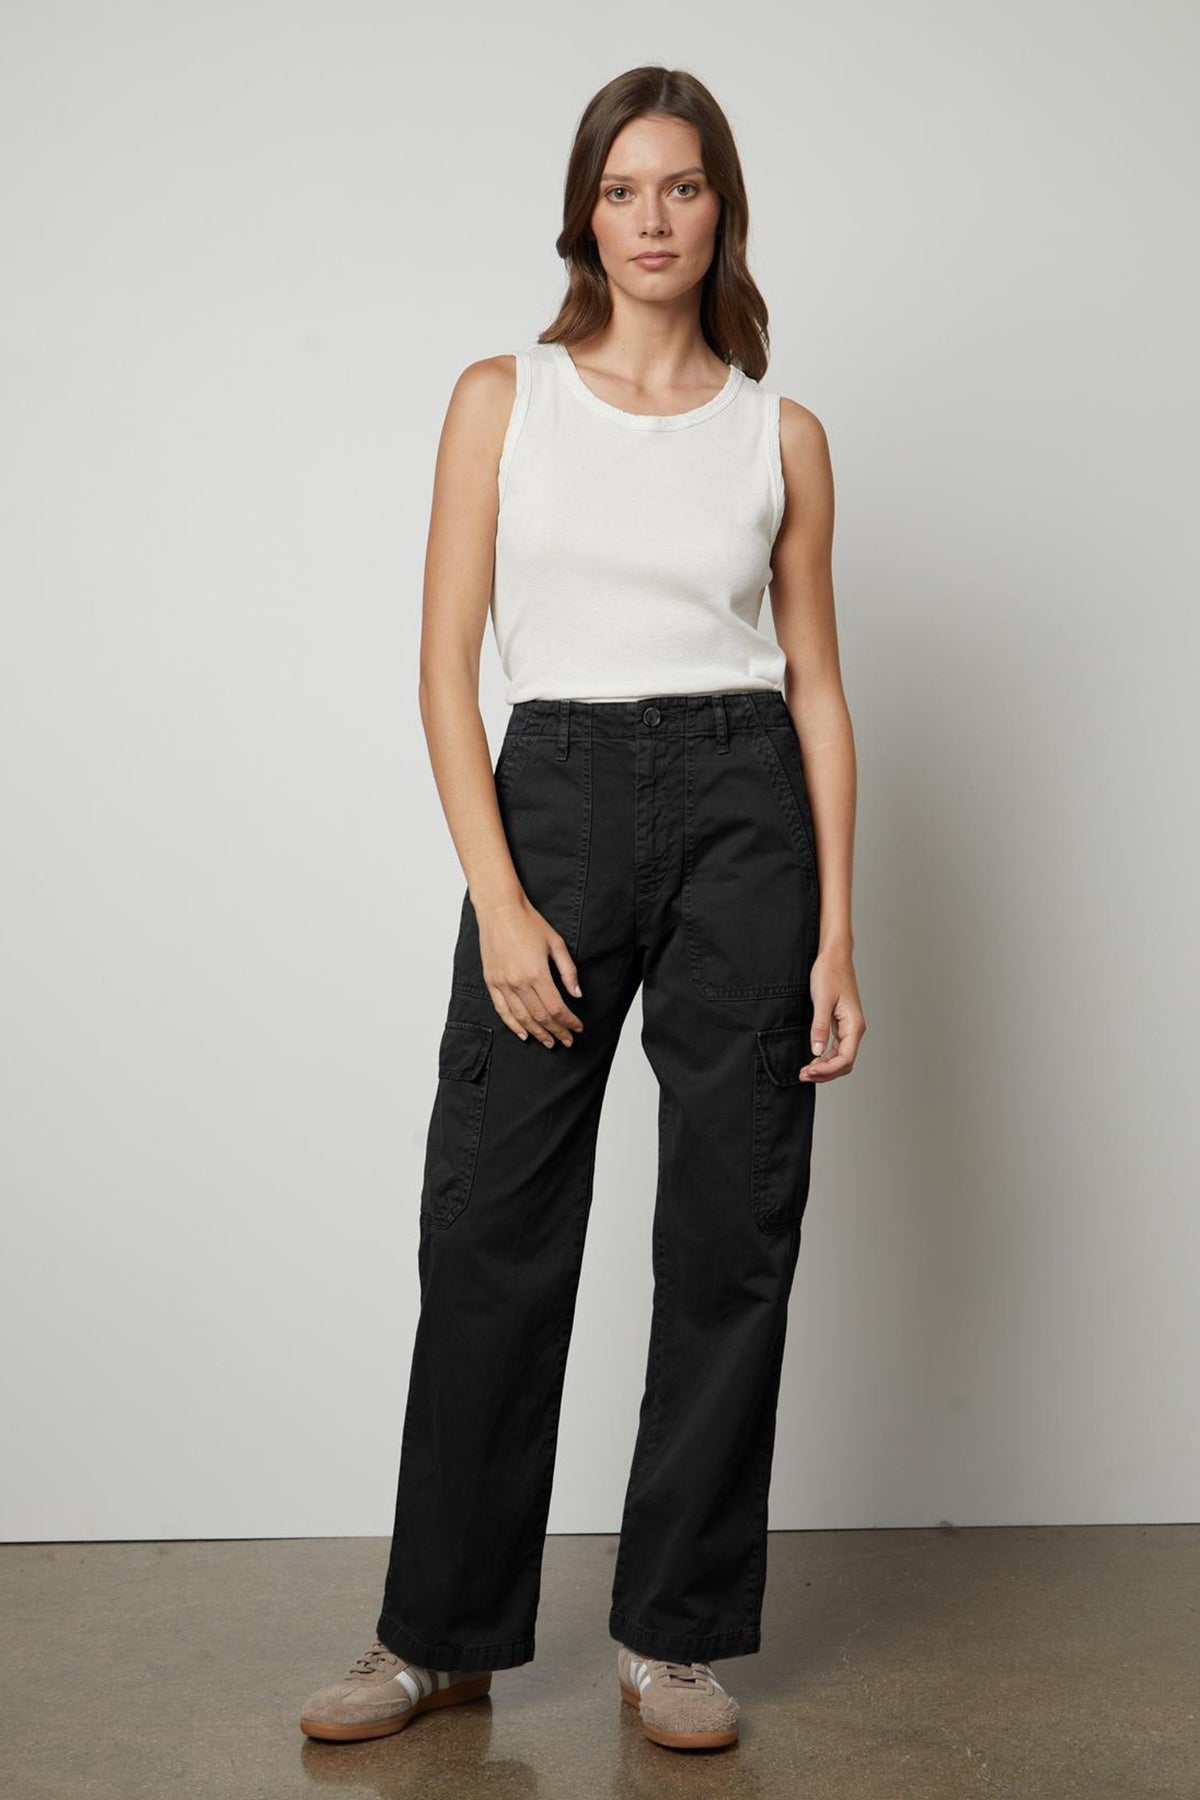 A woman wearing the Velvet by Graham & Spencer MAKAYLA SANDED TWILL CARGO PANT and a white tank top.-26914867708097